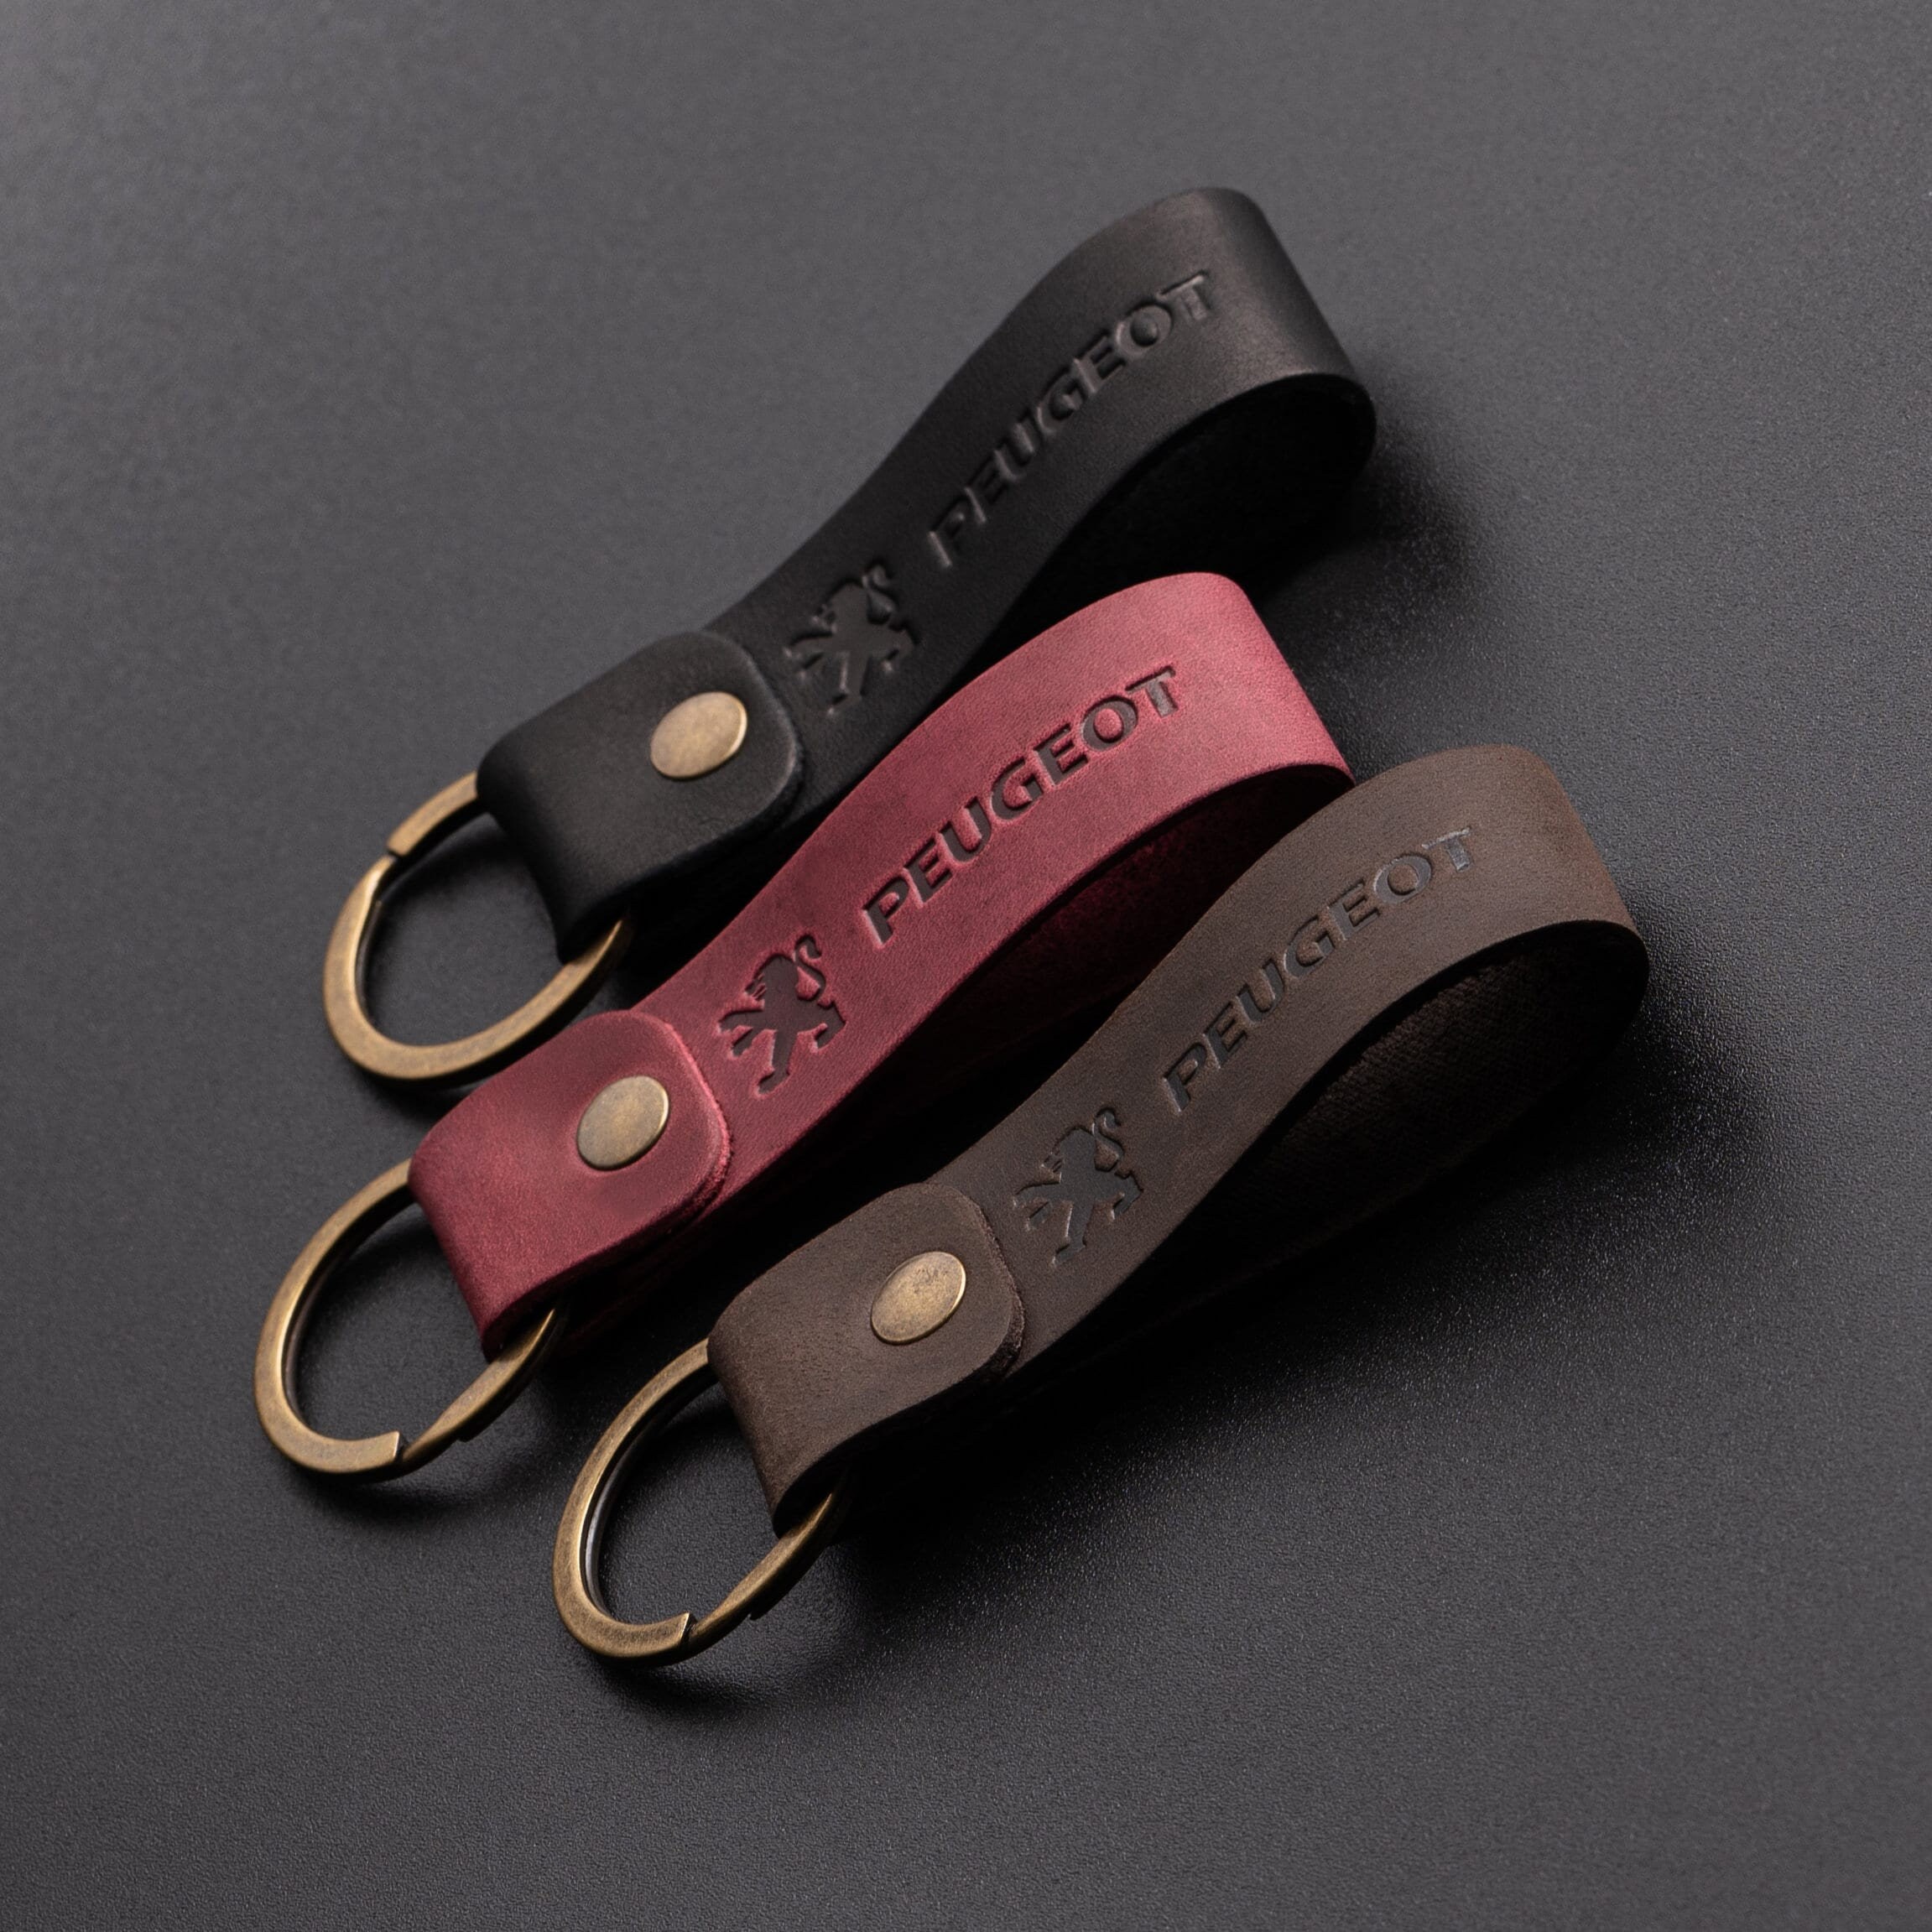 Of Top Fashion Peugeot Metal Leather Biker Keychain Llaveros Chaveiro Car  Emblem Key Holders From Xcdfs6, $10.25